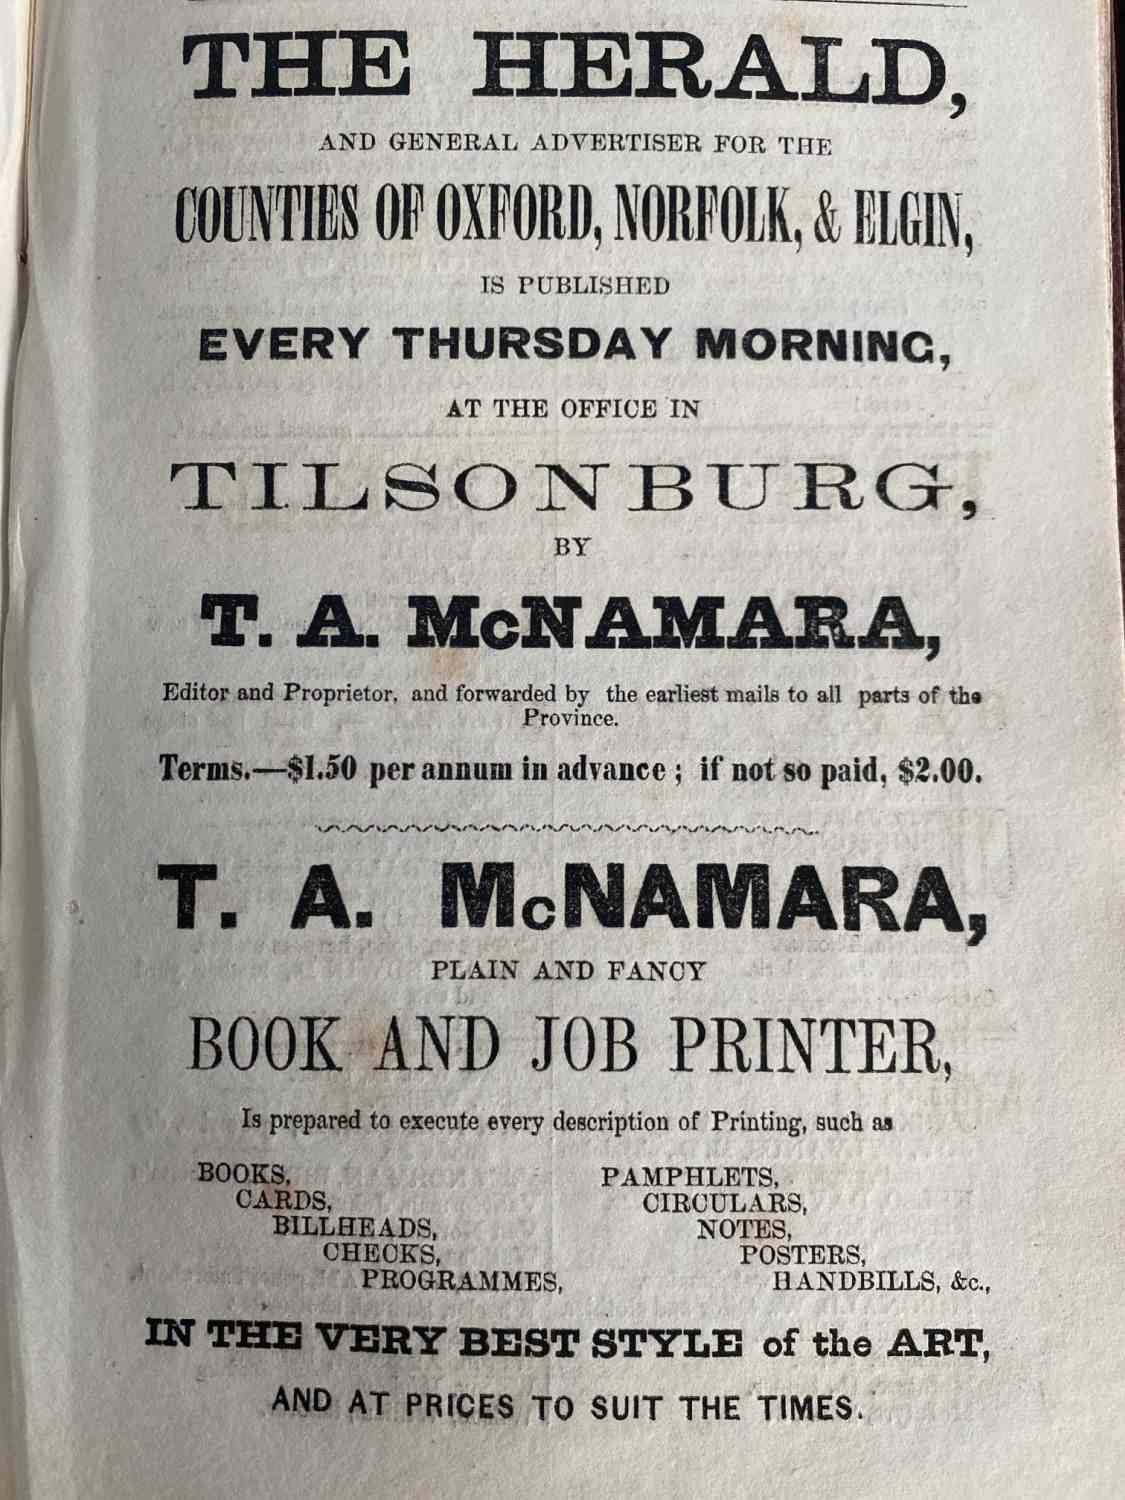 Advertisement for The Herald newspaper, 